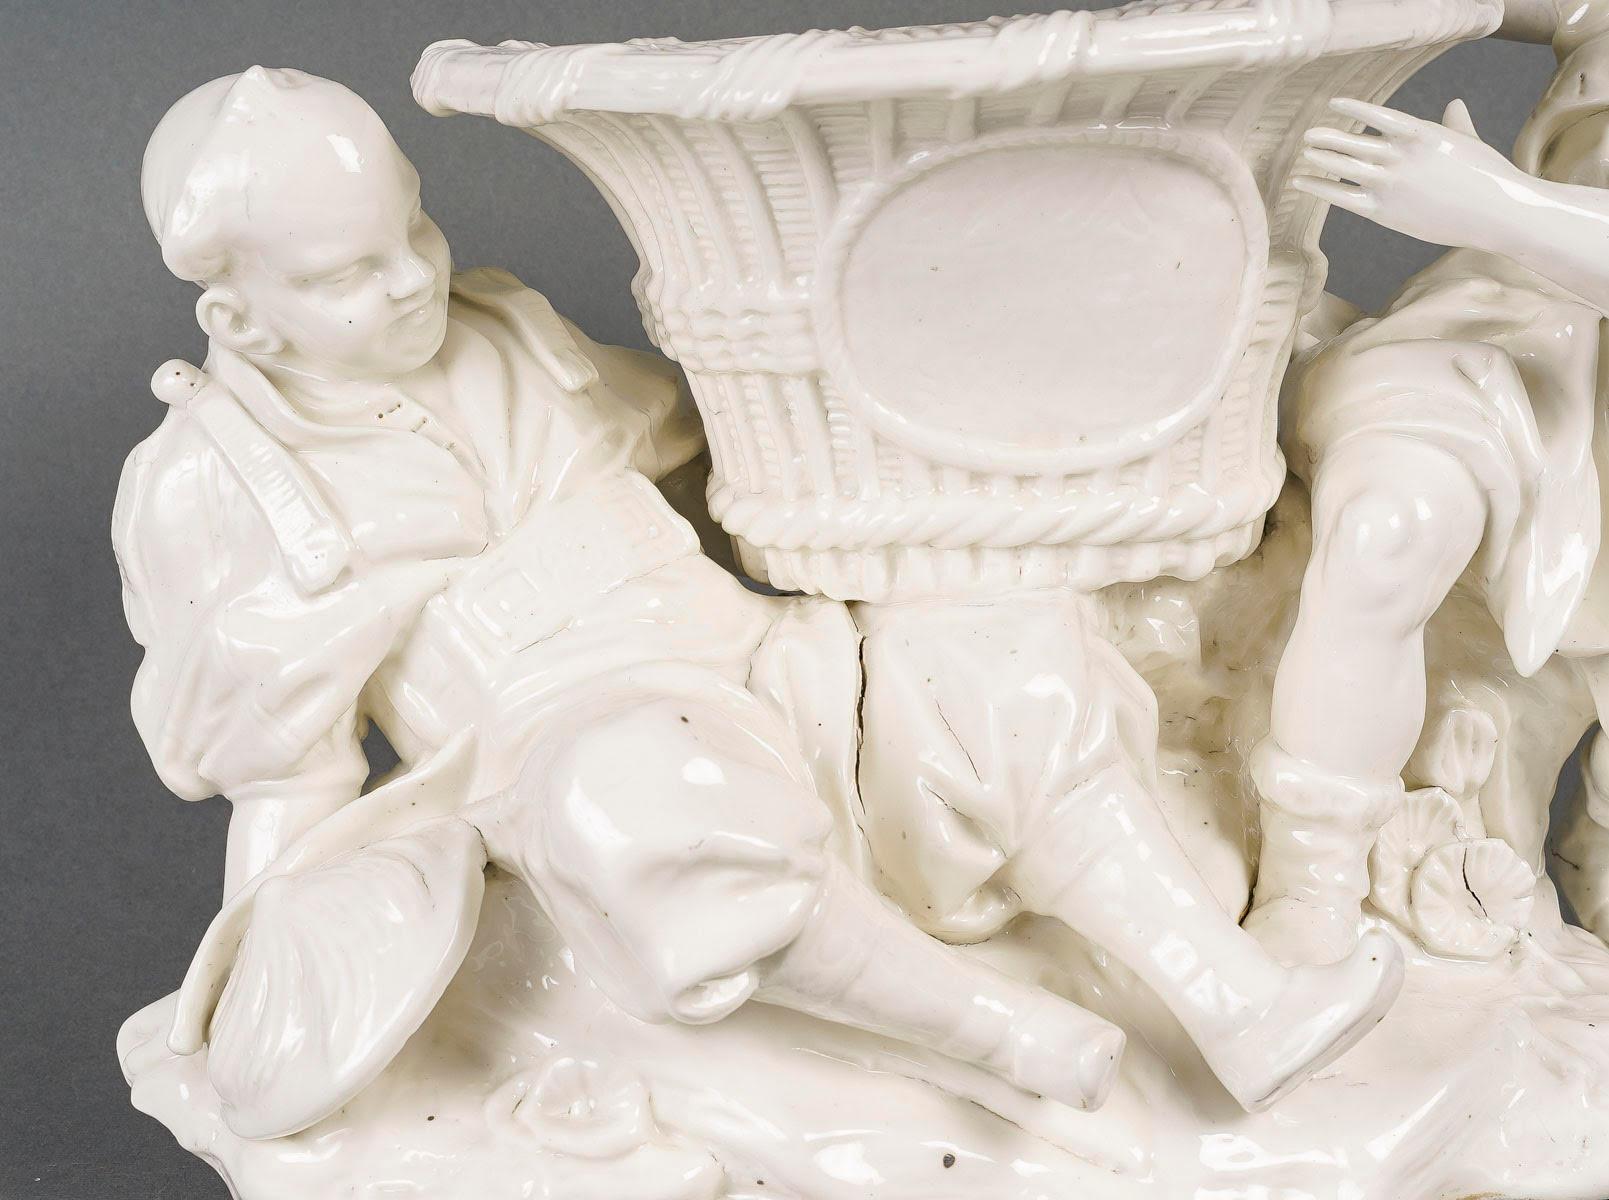 White Porcelain Jardinière, Chinese style, early 20th century.

Early 20th century white porcelain chinoiserie planter, centrepiece, depicting two figures surrounding the flowerpot and highlighting it, a beautiful presentation for a centrepiece.
h: